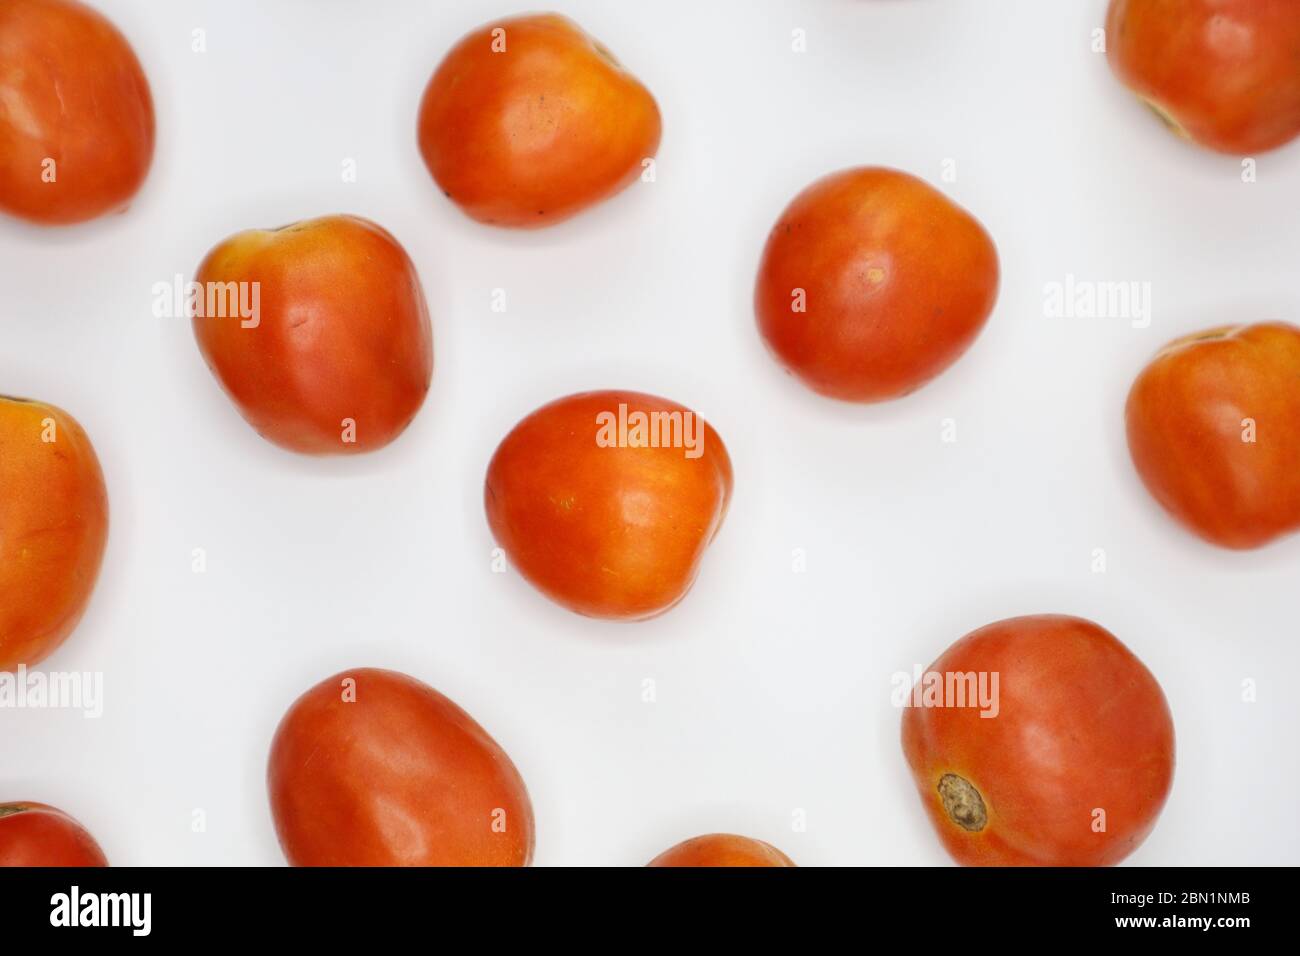 red tomatoes background. Group of tomatoes. fresh vegetarian. Stock Photo